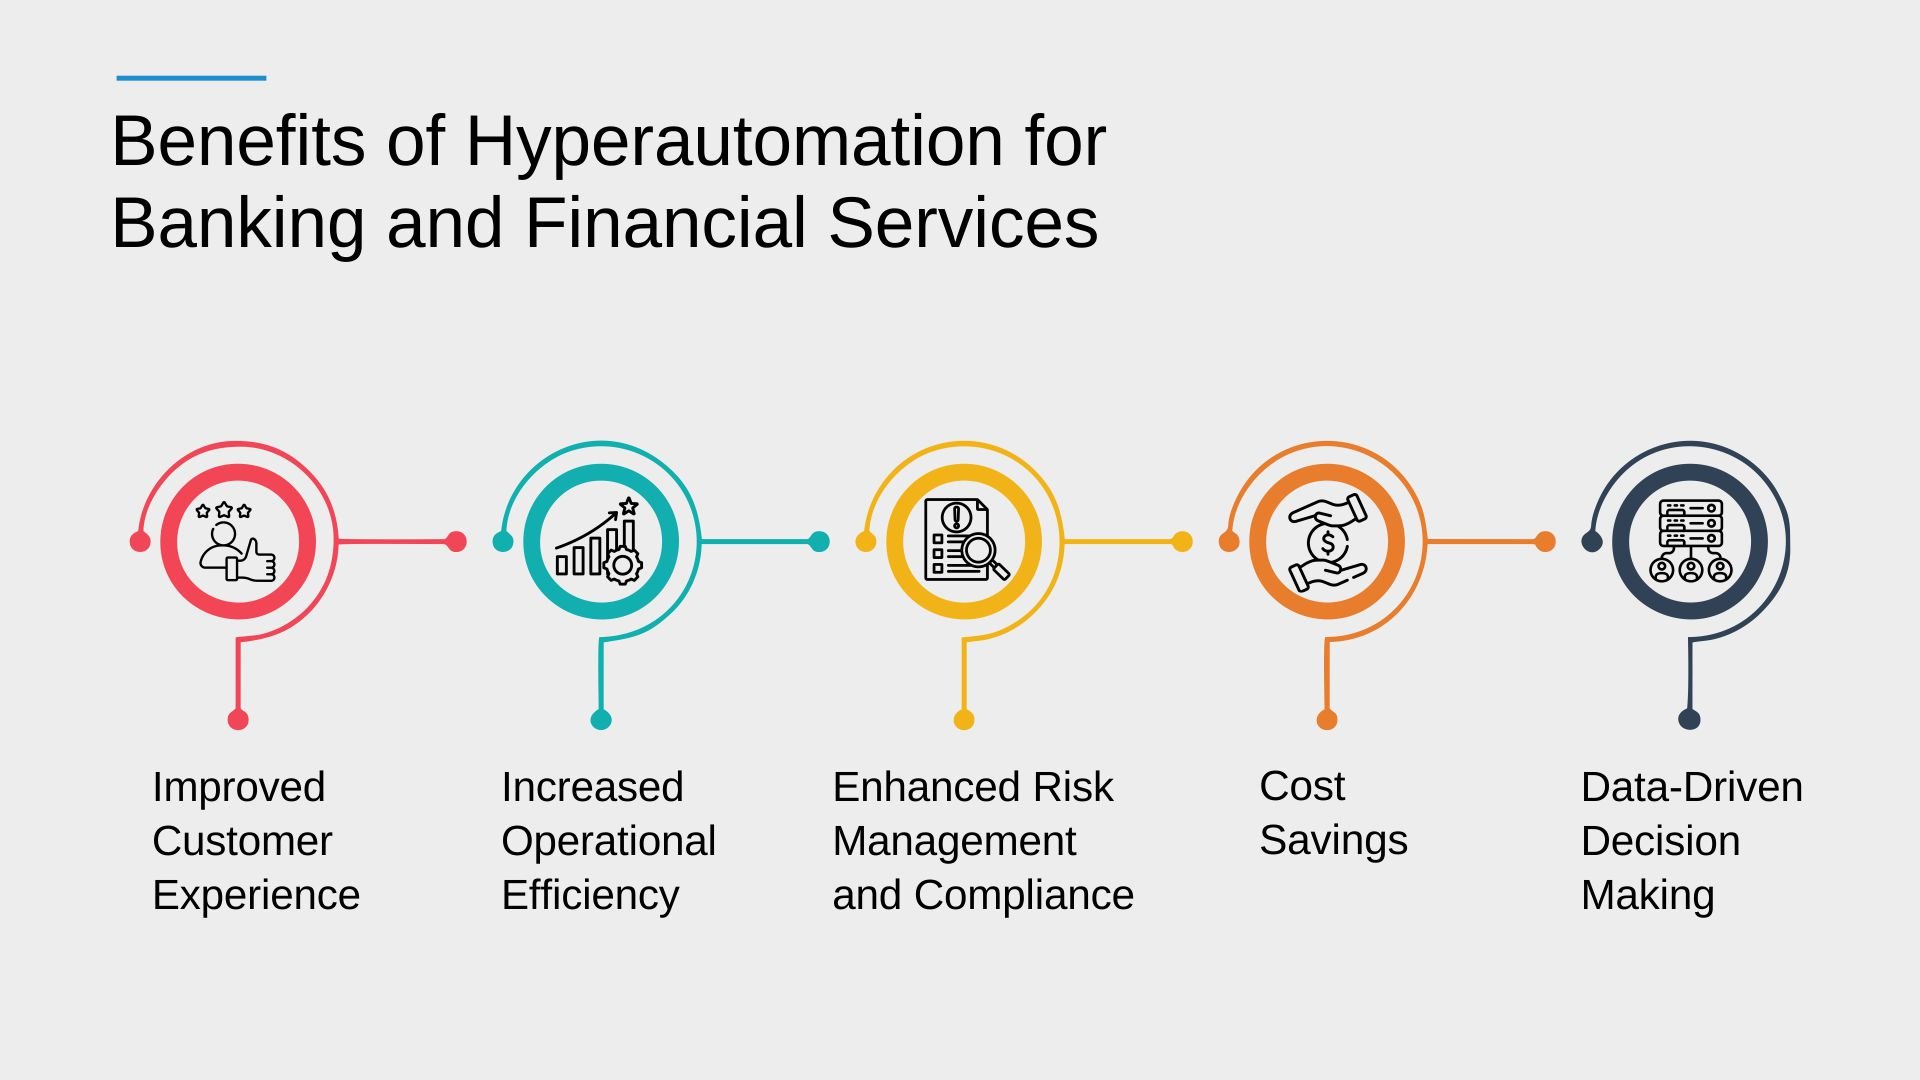 Benefits of Hyperautomation for Banking and Financial Services- Infographic